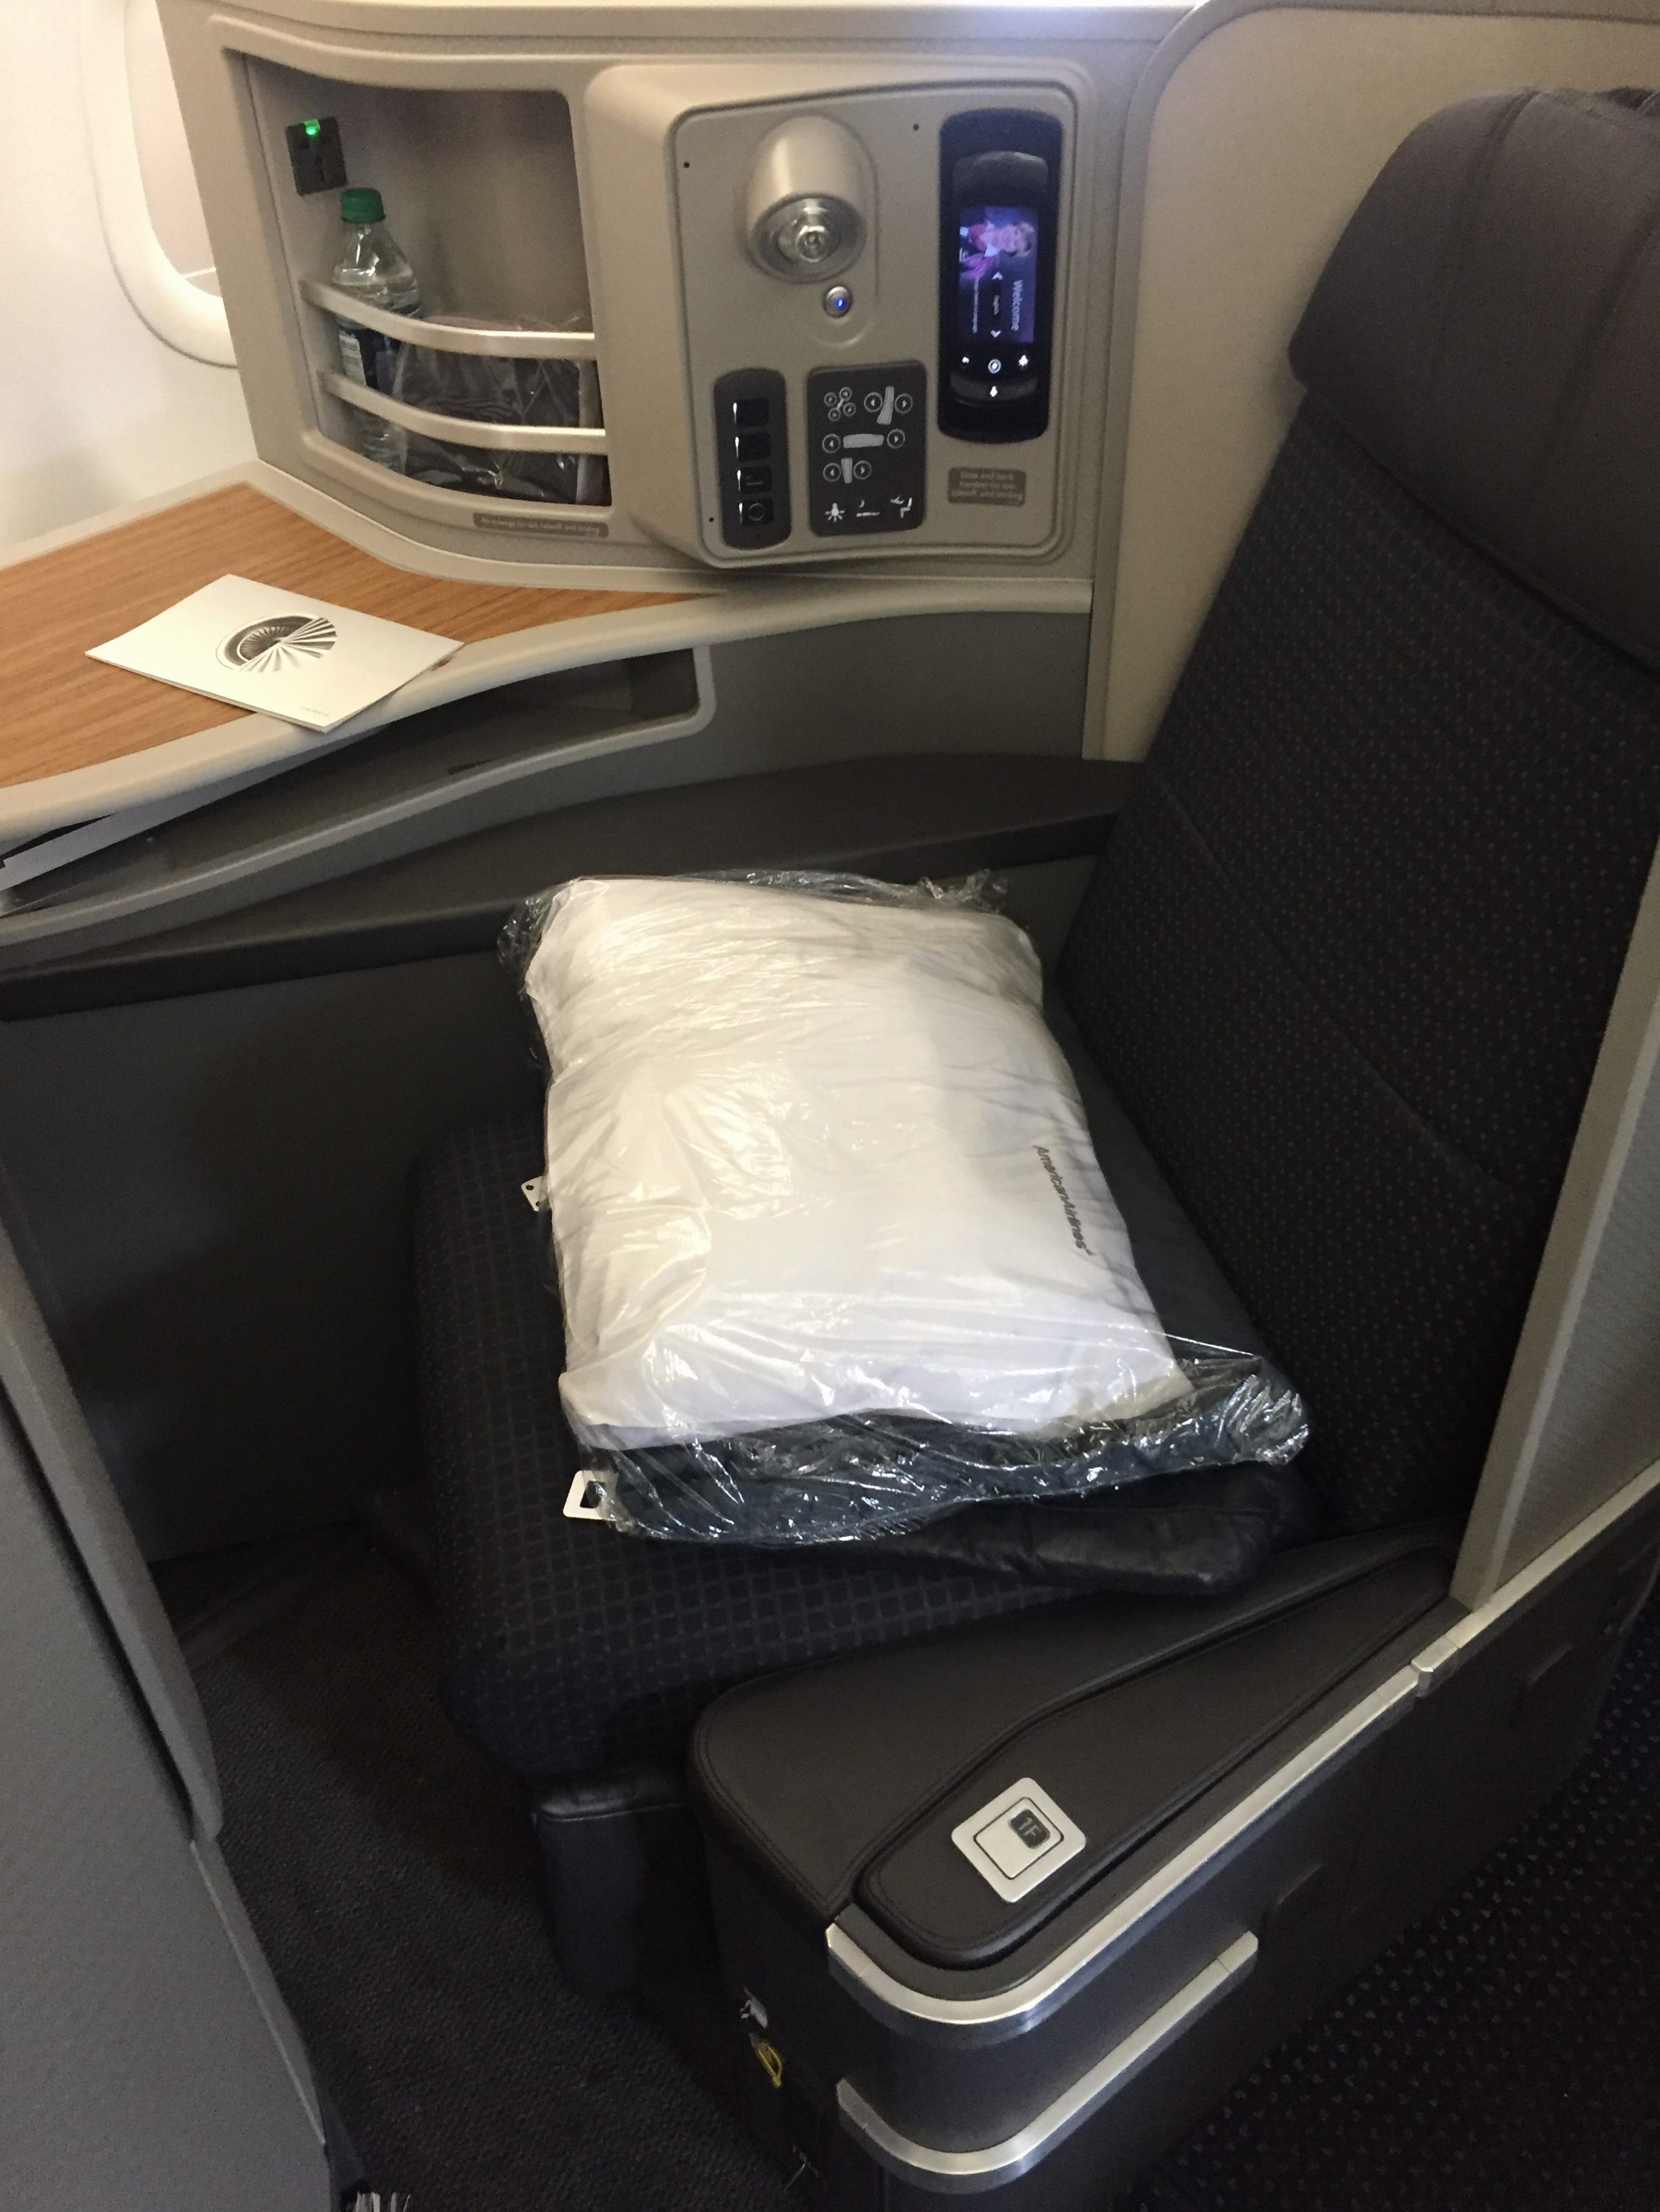 First class seat on American Airlines transcon - JFK-LAX/SFO